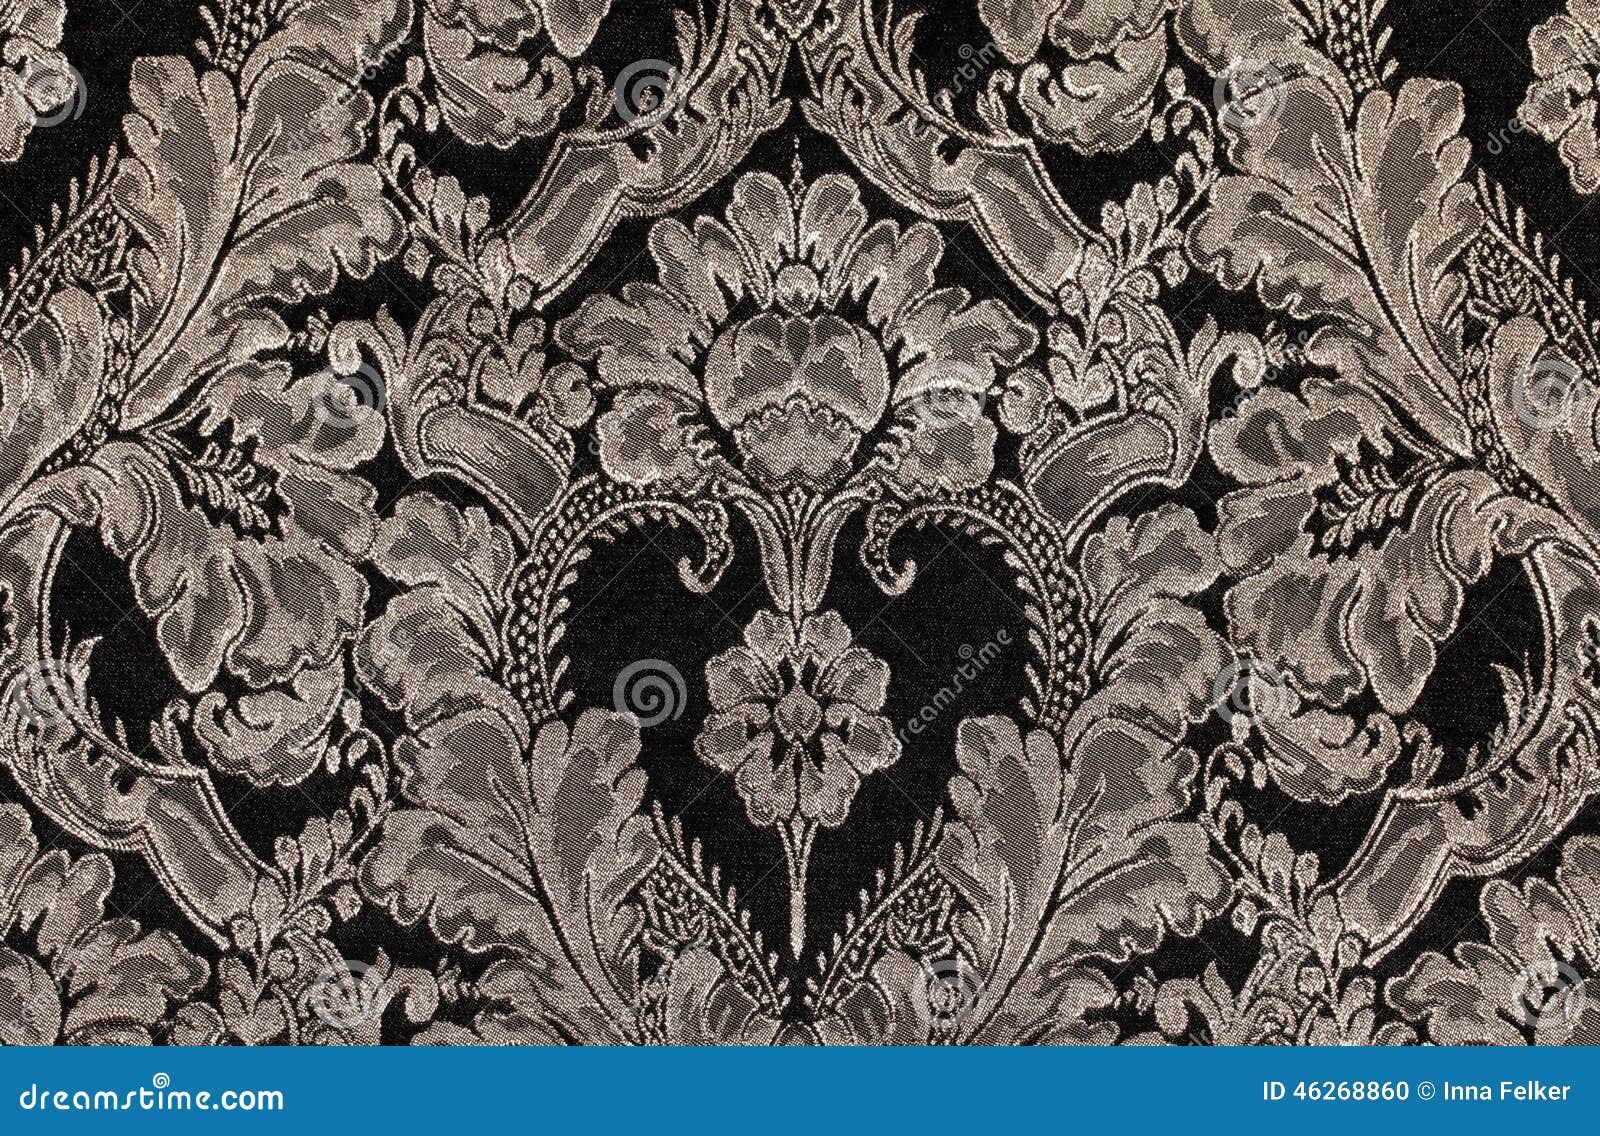 brown vintage fabric with damask pattern as background